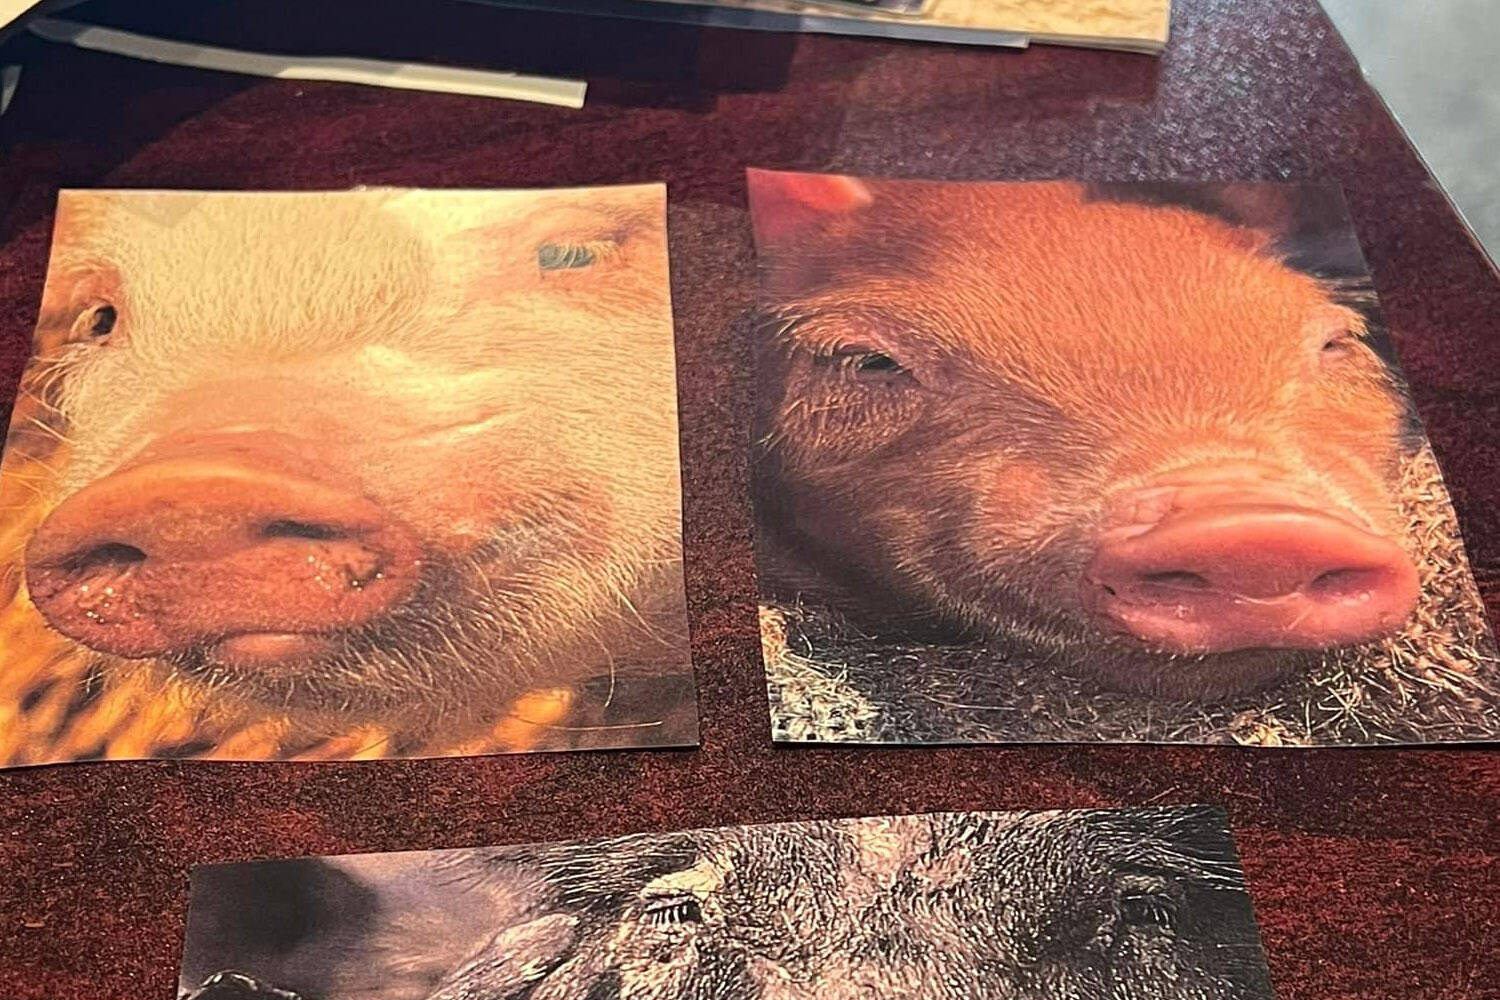 Images of pigs are cut from calendars to be used in making greeting cards for military servicemembers. (Photo courtesy Toni Loop)